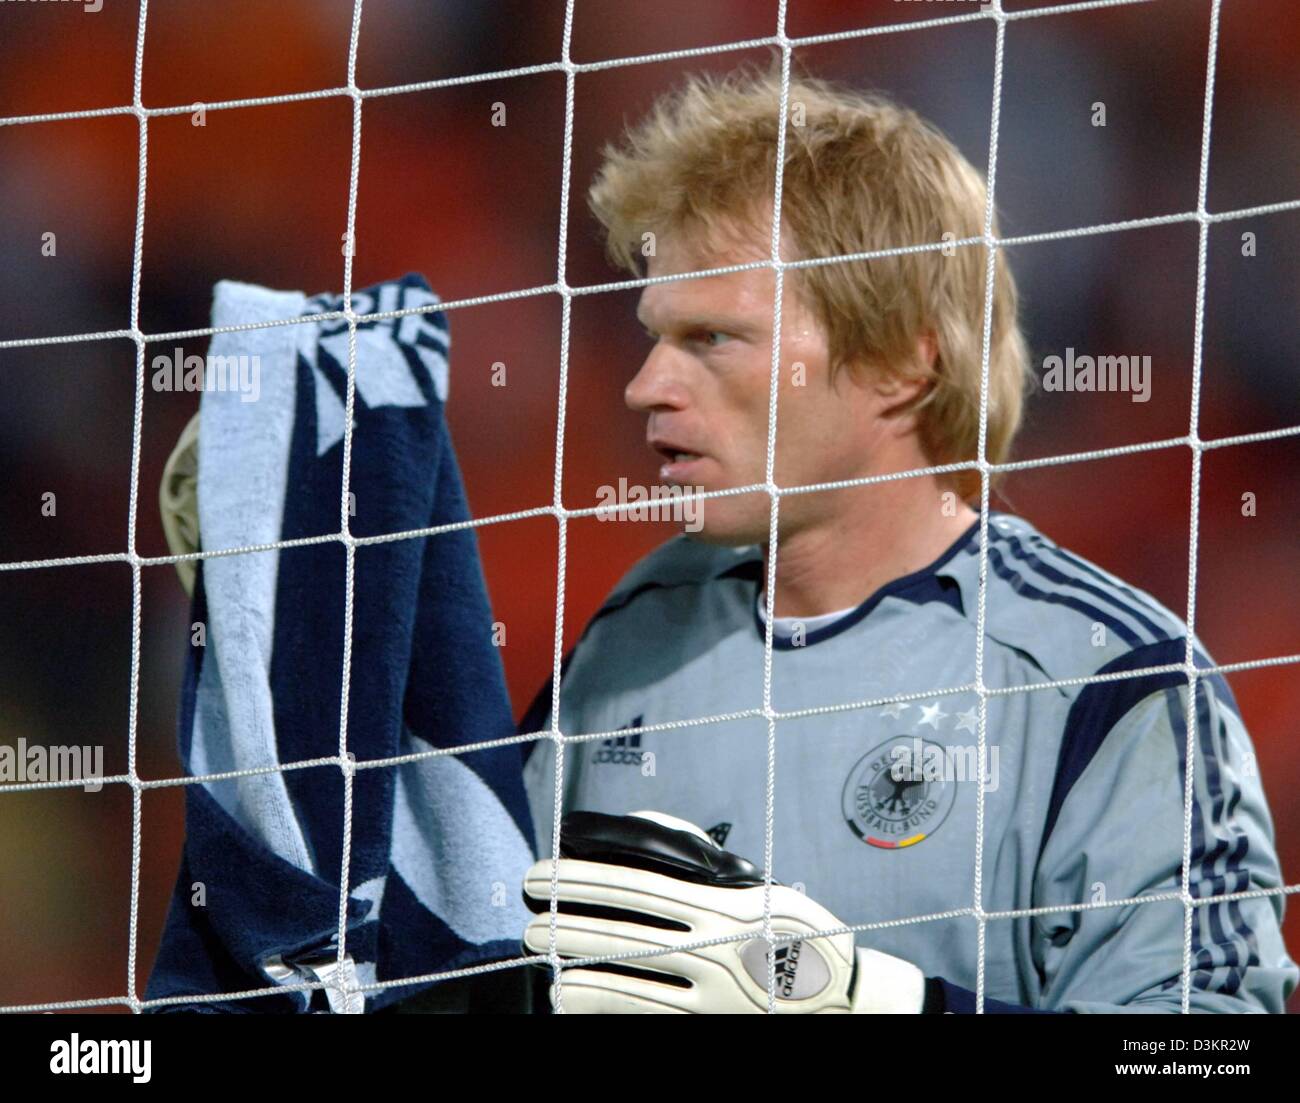 (dpa) - The picture shows the Goalkeeper of the German national soccer team Oliver Kahn after the friendly match Netherlands vs Germany at the 'De Kuip' stadium in Rotterdam, Netherlands, 17 August 2005. The game ended in a 2-2 draw. Photo: Bernd Weissbrod Stock Photo